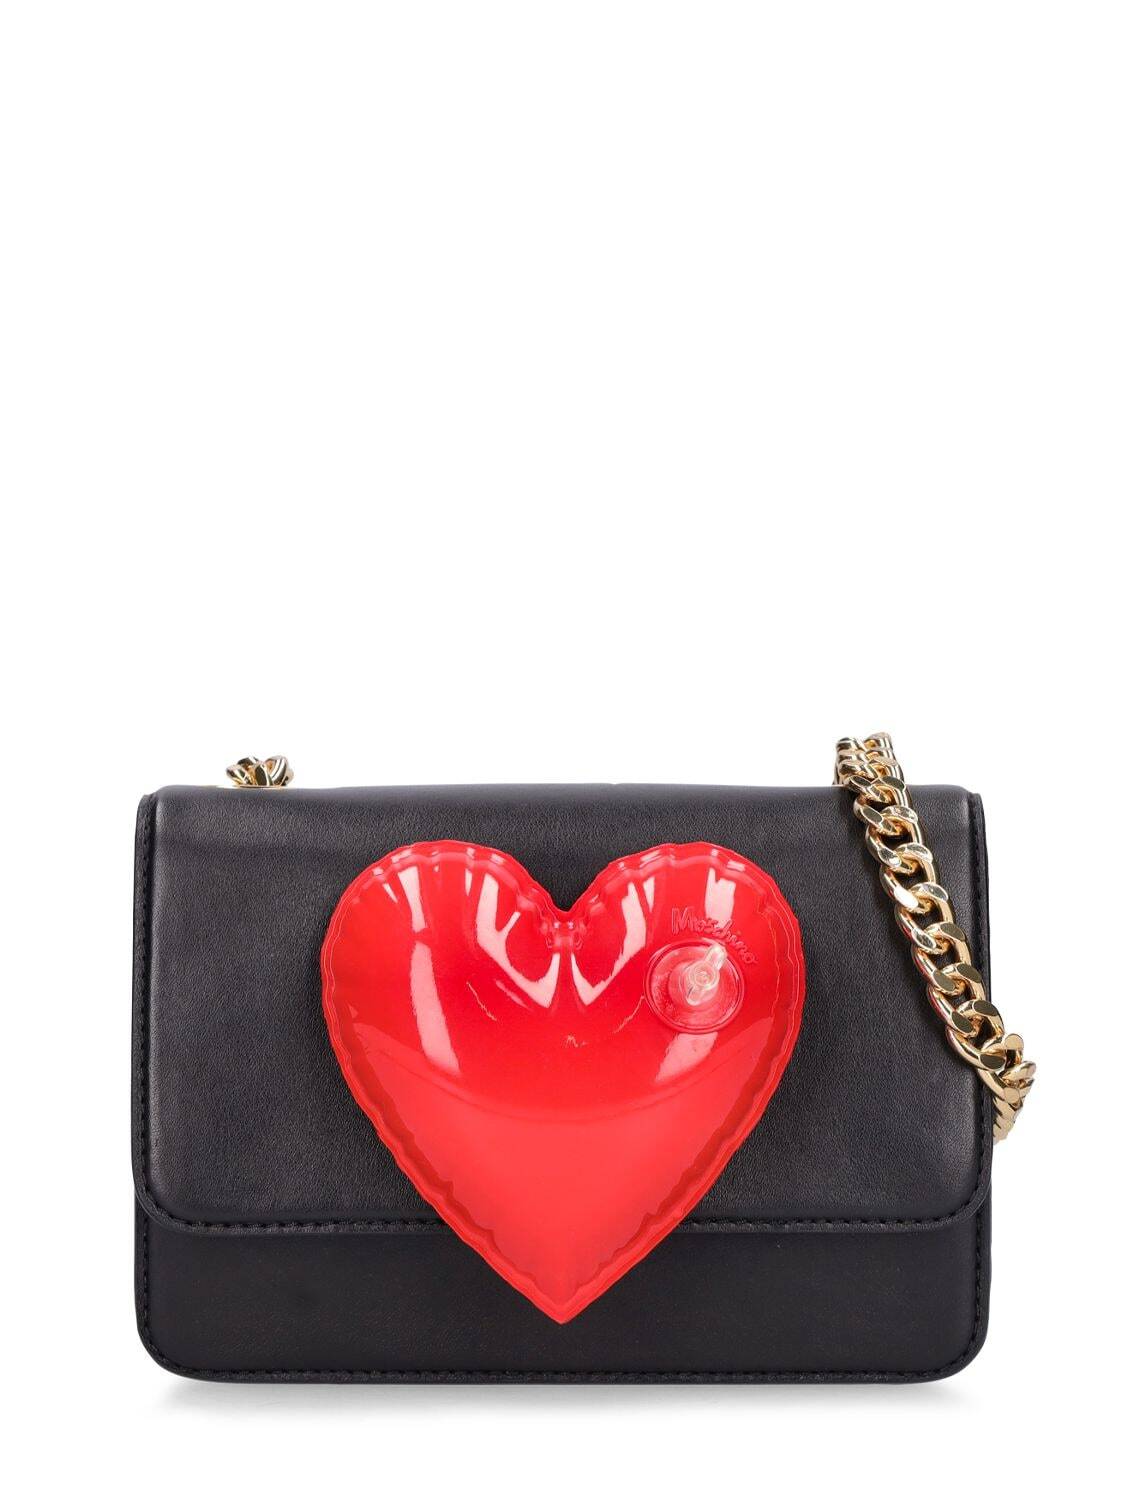 MOSCHINO Padded Heart Shoulder Bag in black